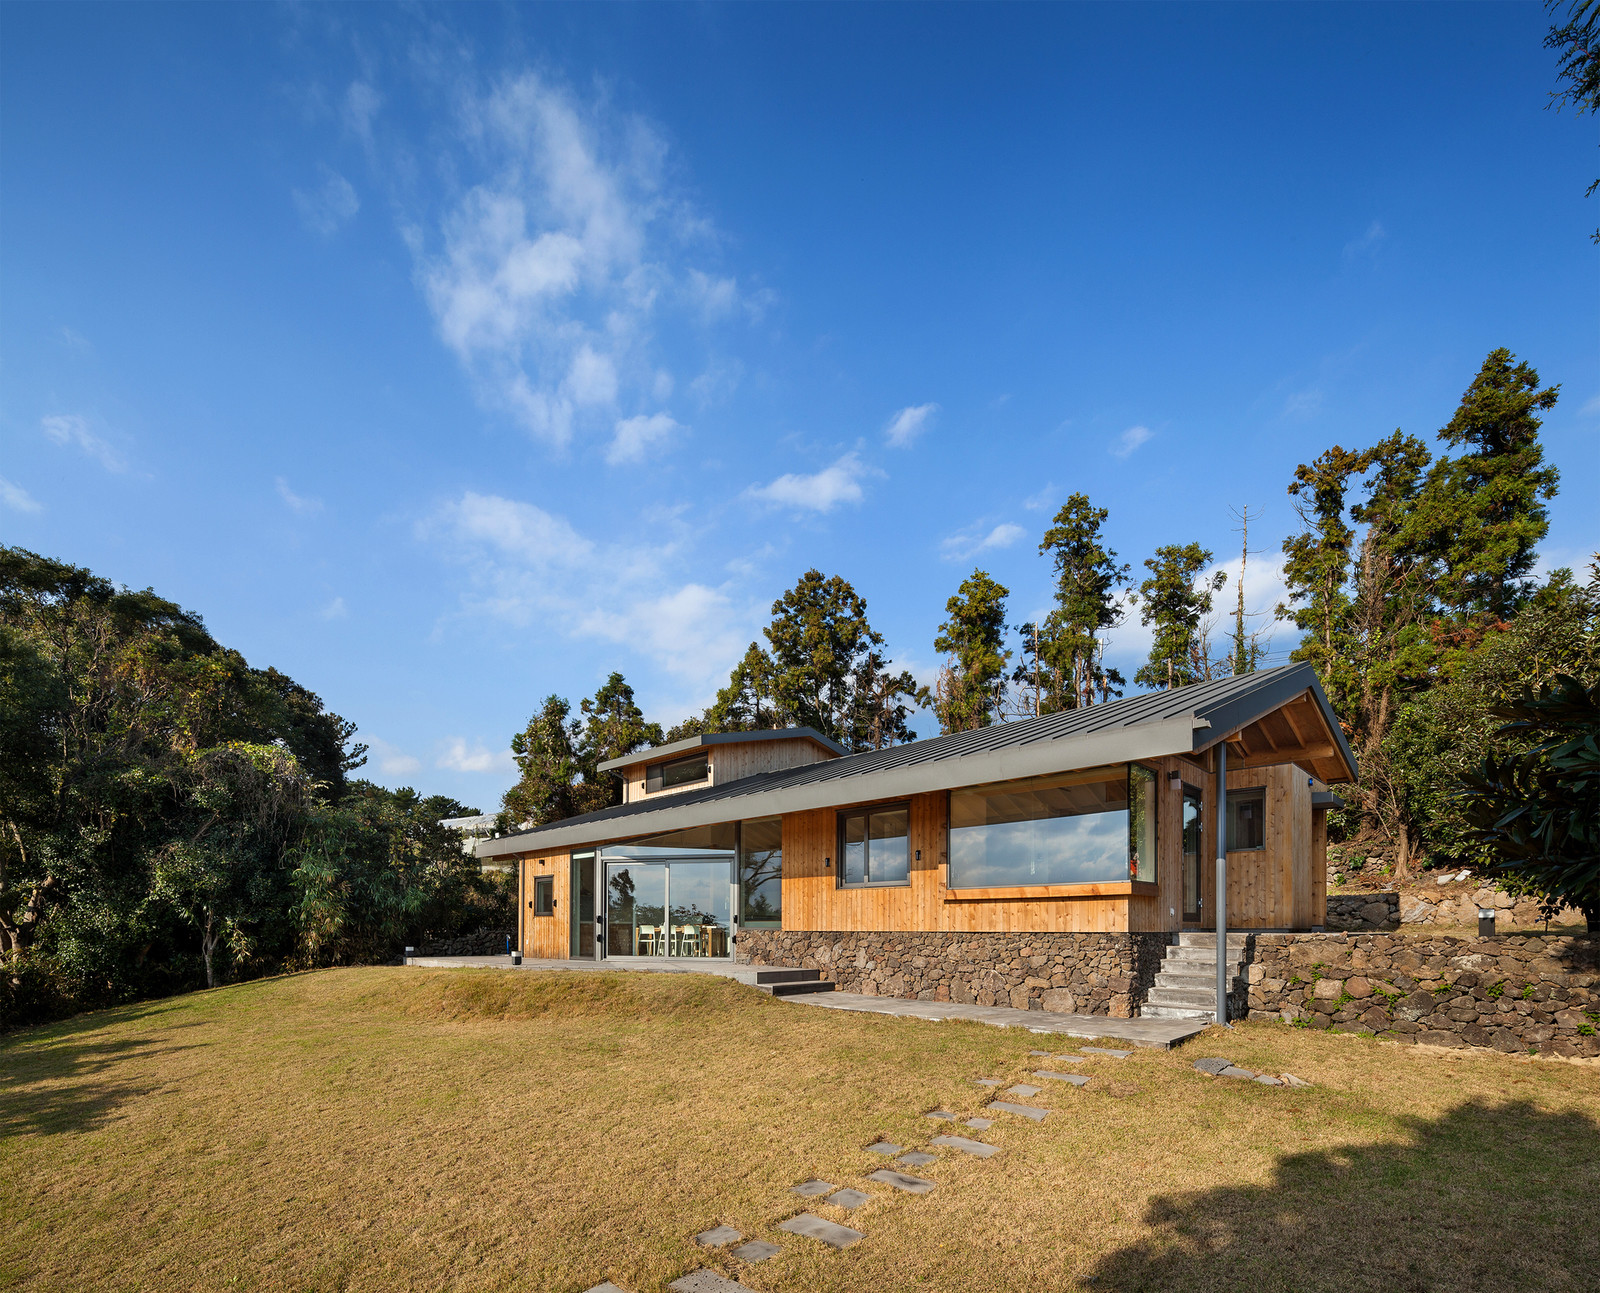 Tosan-ri Guesthouse in South Korea